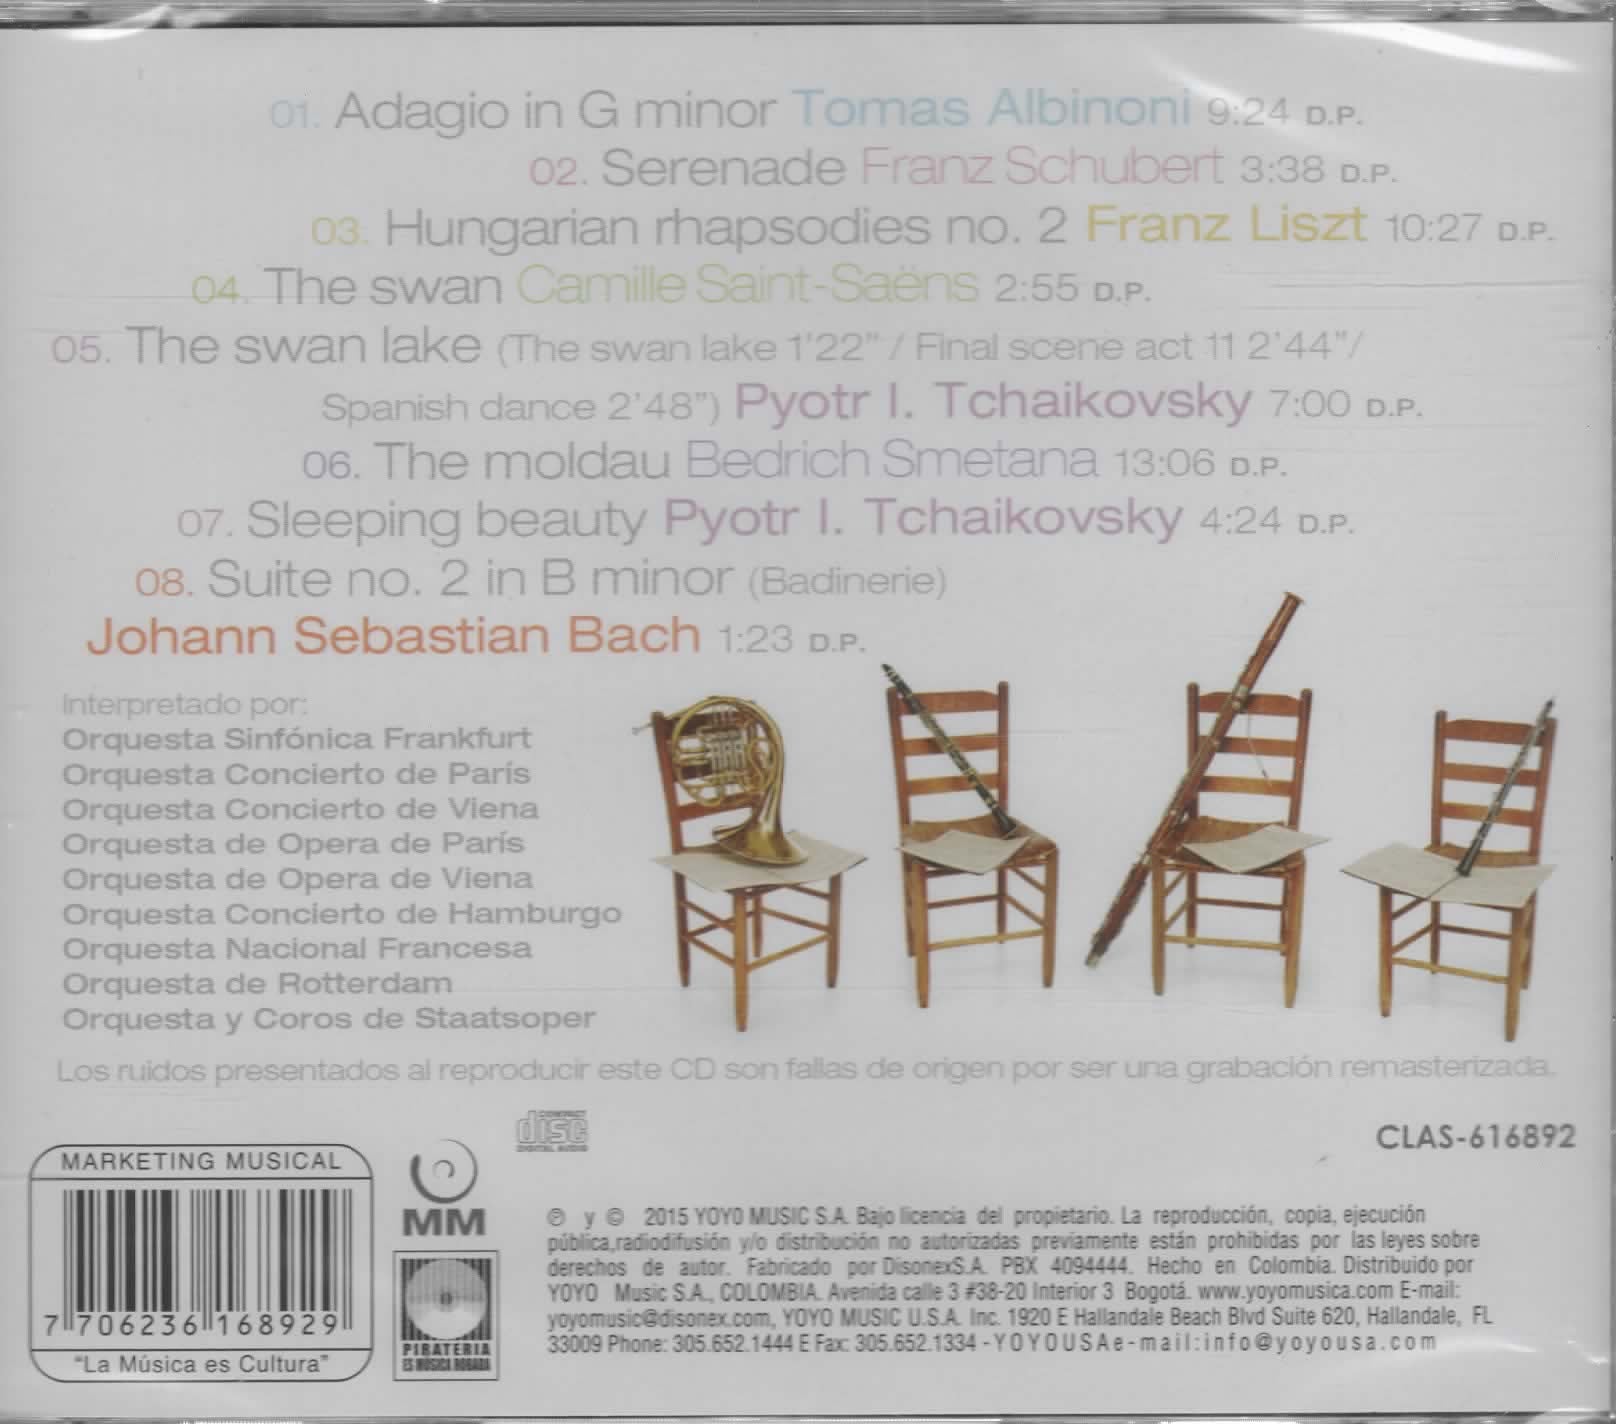 CD The gratest Classical Masterpieces Vol. 6